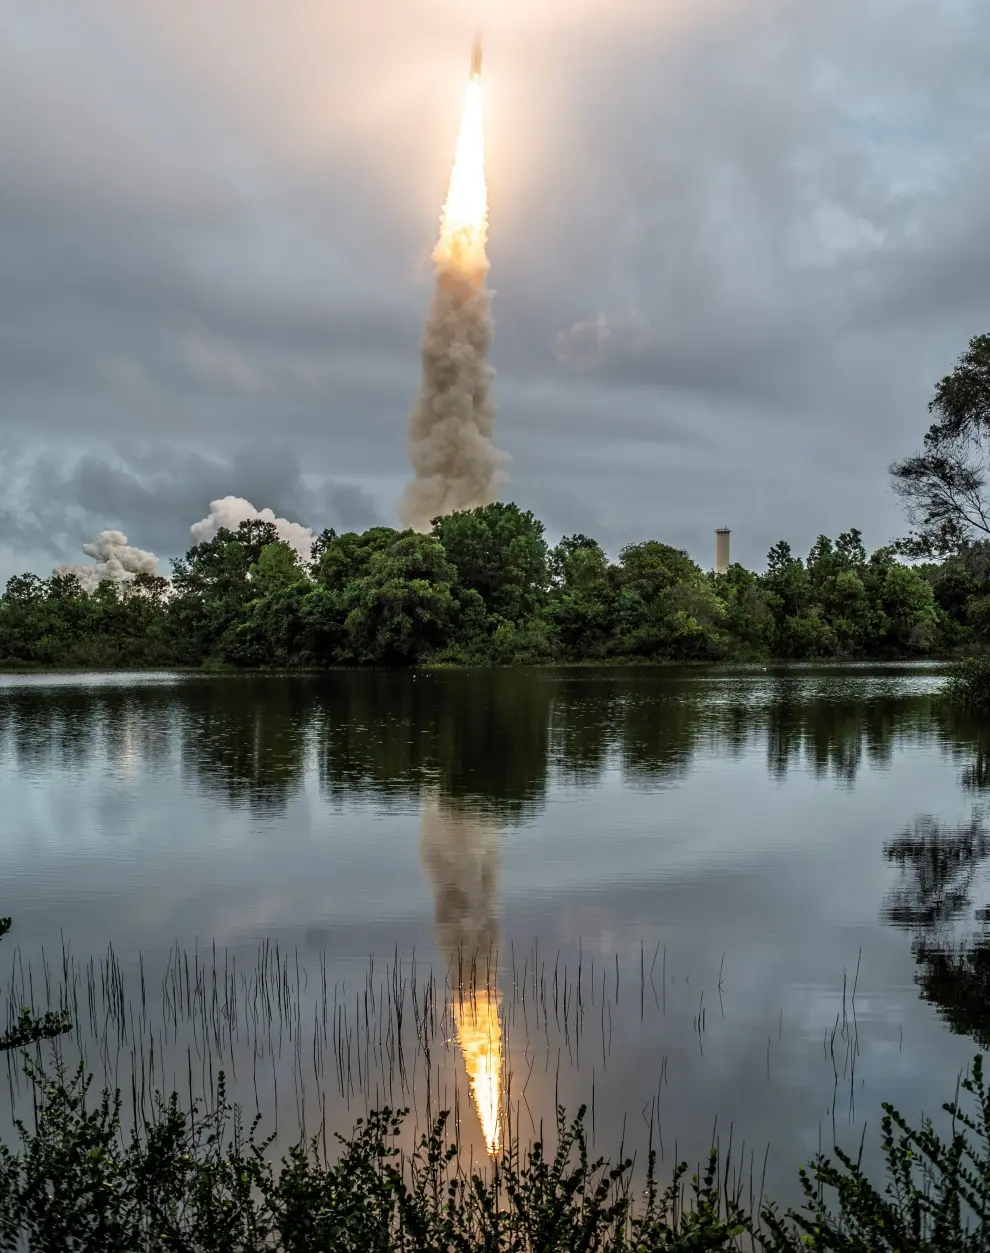 Kourou (French Guiana), 25/12/2021.- A handout photo made available by the NASA shows the Arianespace's Ariane 5 rocket carrying NASA's James Webb Space Telescope, after its launch in the Jupiter Center at the Guiana Space Center in Kourou, French Guiana, 25 December 2021. The James Webb Space Telescope (sometimes called JWST or Webb) is a large infrared telescope with a 21.3 foot (6.5 meter) primary mirror. The observatory will study every phase of cosmic history from within our solar system to the most distant observable galaxies in the early universe. (Guayana Francesa) EFE/EPA/NASA/Chris Gunn HANDOUT MANDATORY CREDIT: (NASA/Chris Gunn) HANDOUT EDITORIAL USE ONLY/NO SALES
 FRENCH GUIANA RESEARCH WEBB TELESCOPE